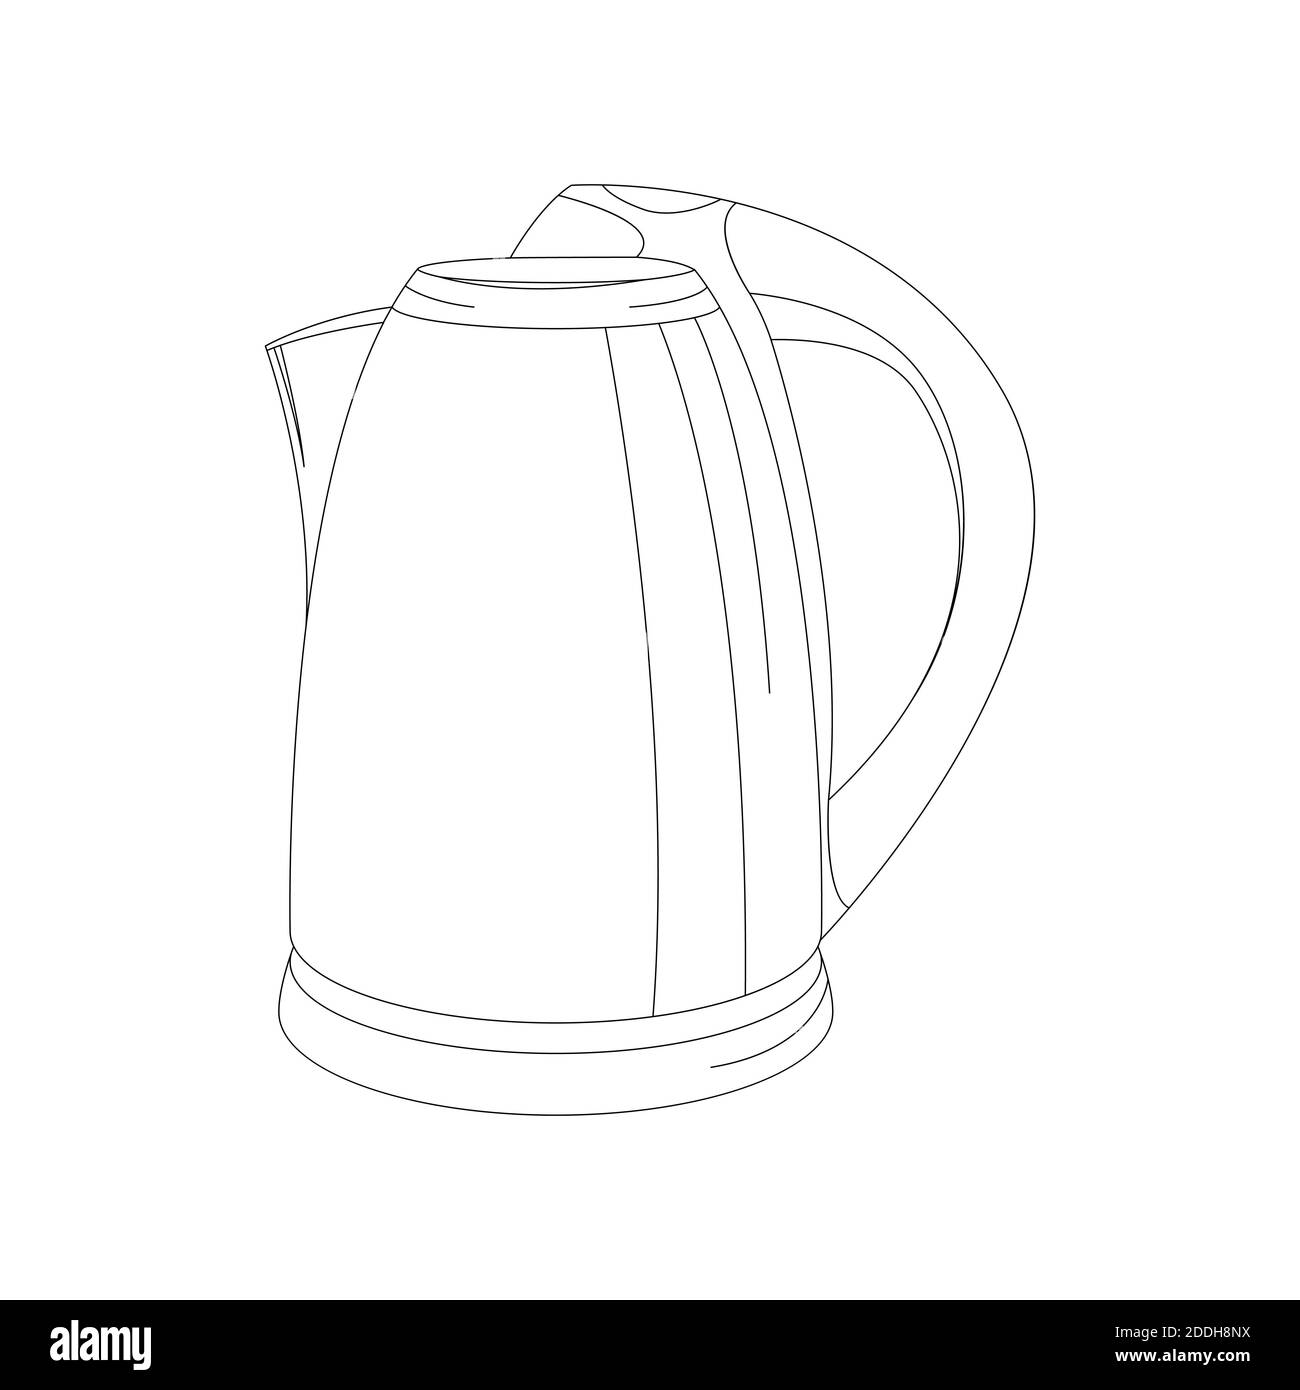 How to Sketch a Tea Kettle with the Tip and Side of a Pencil  YouTube